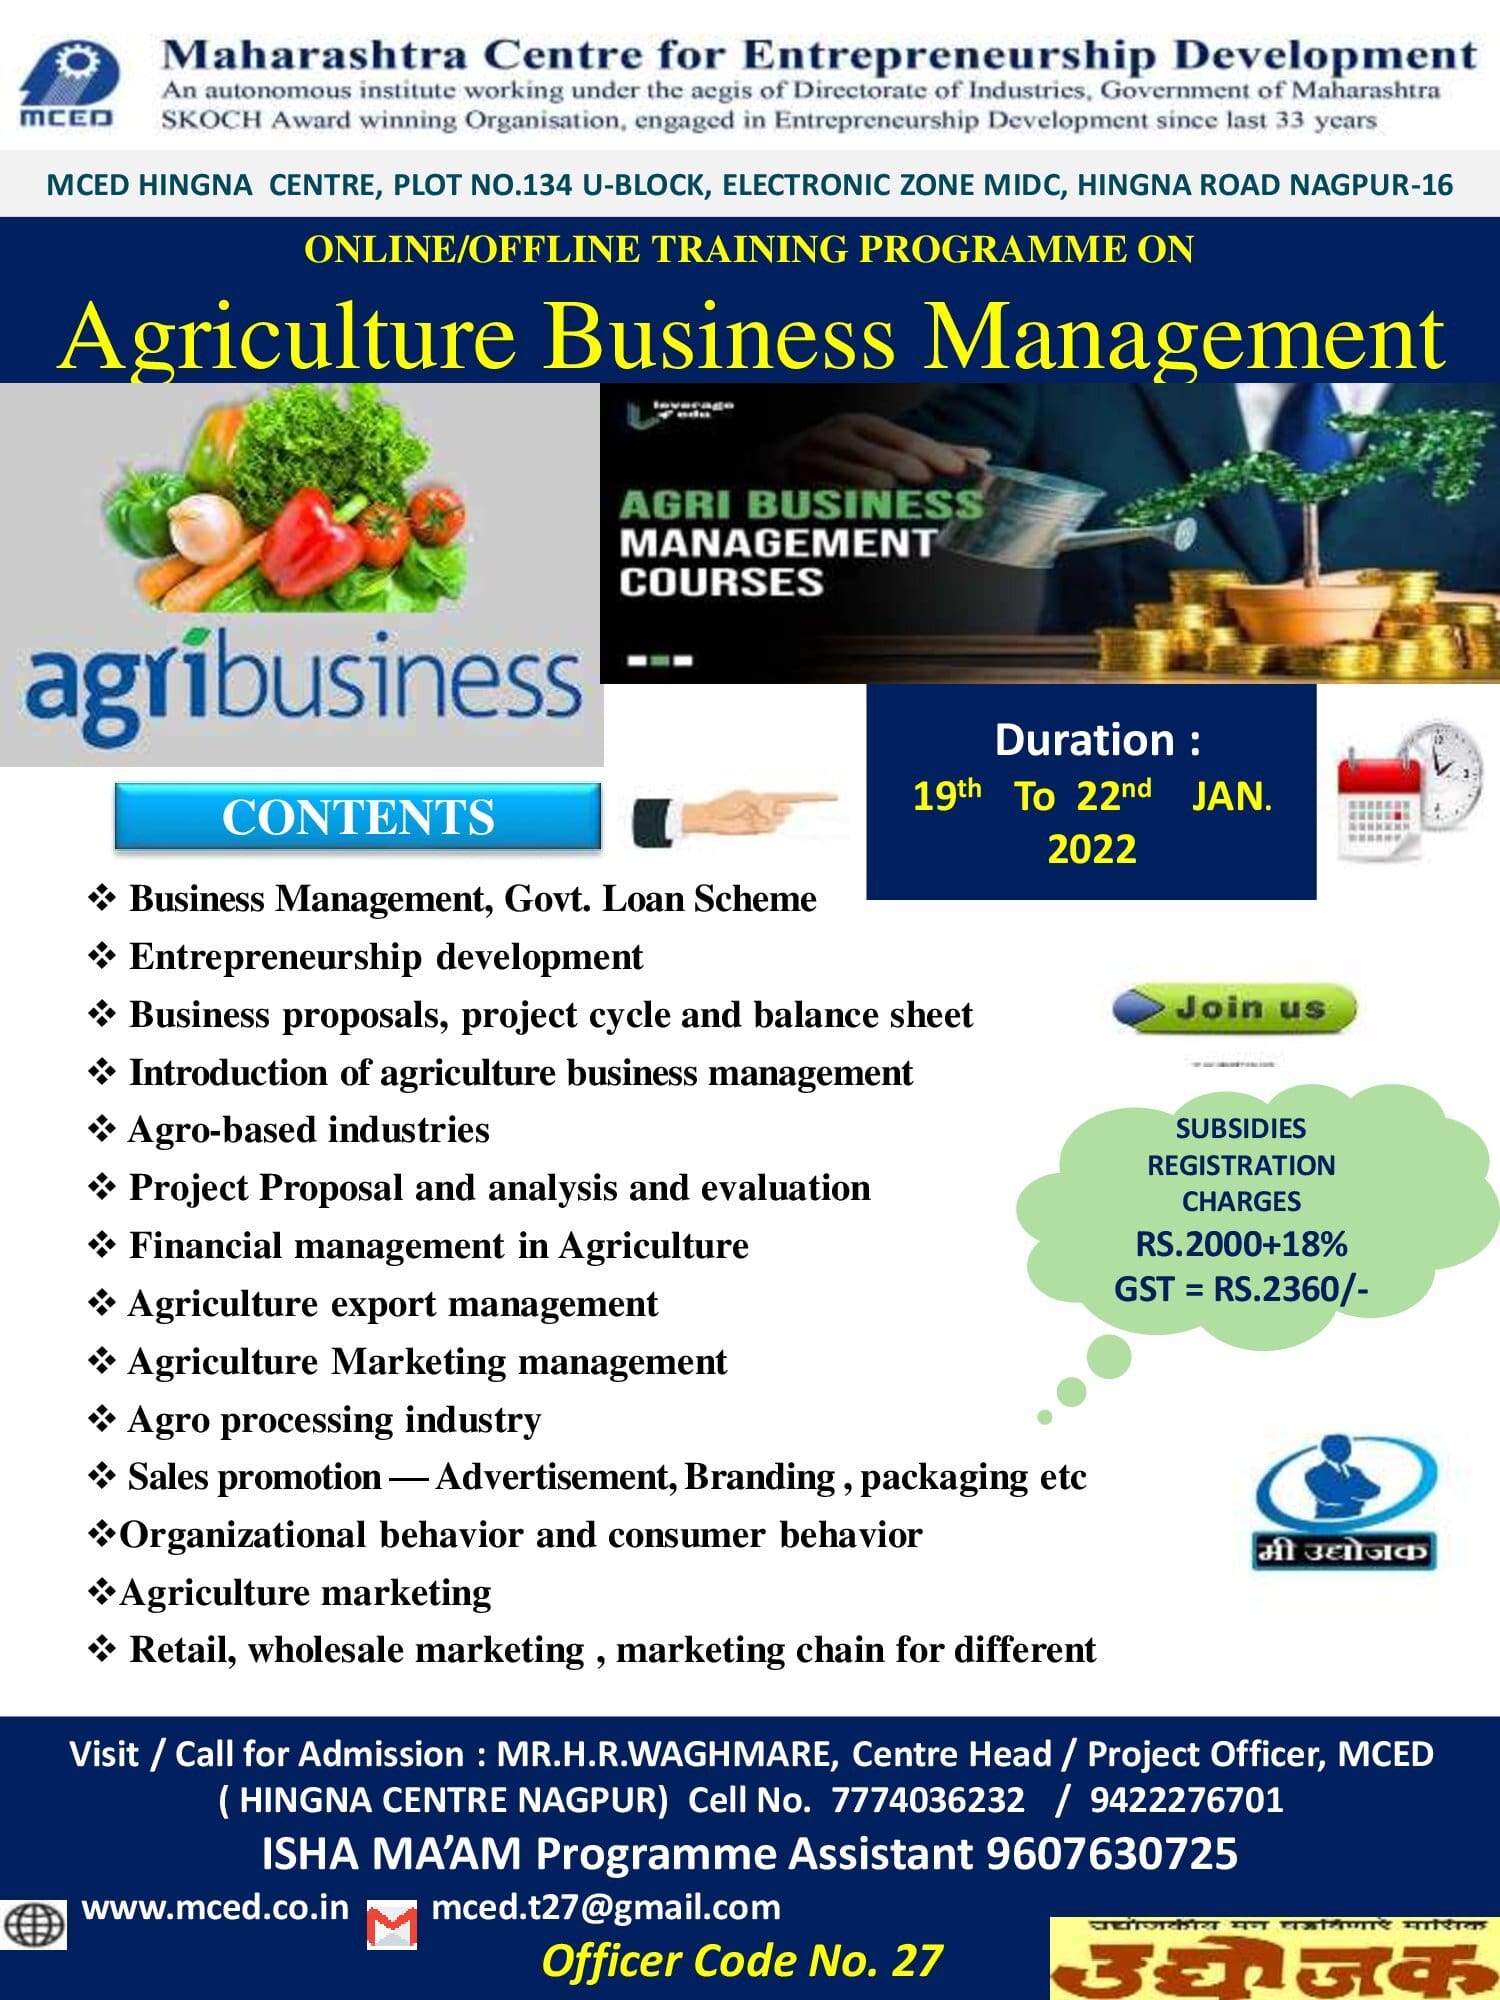 Agriculture Business Management Training Programme